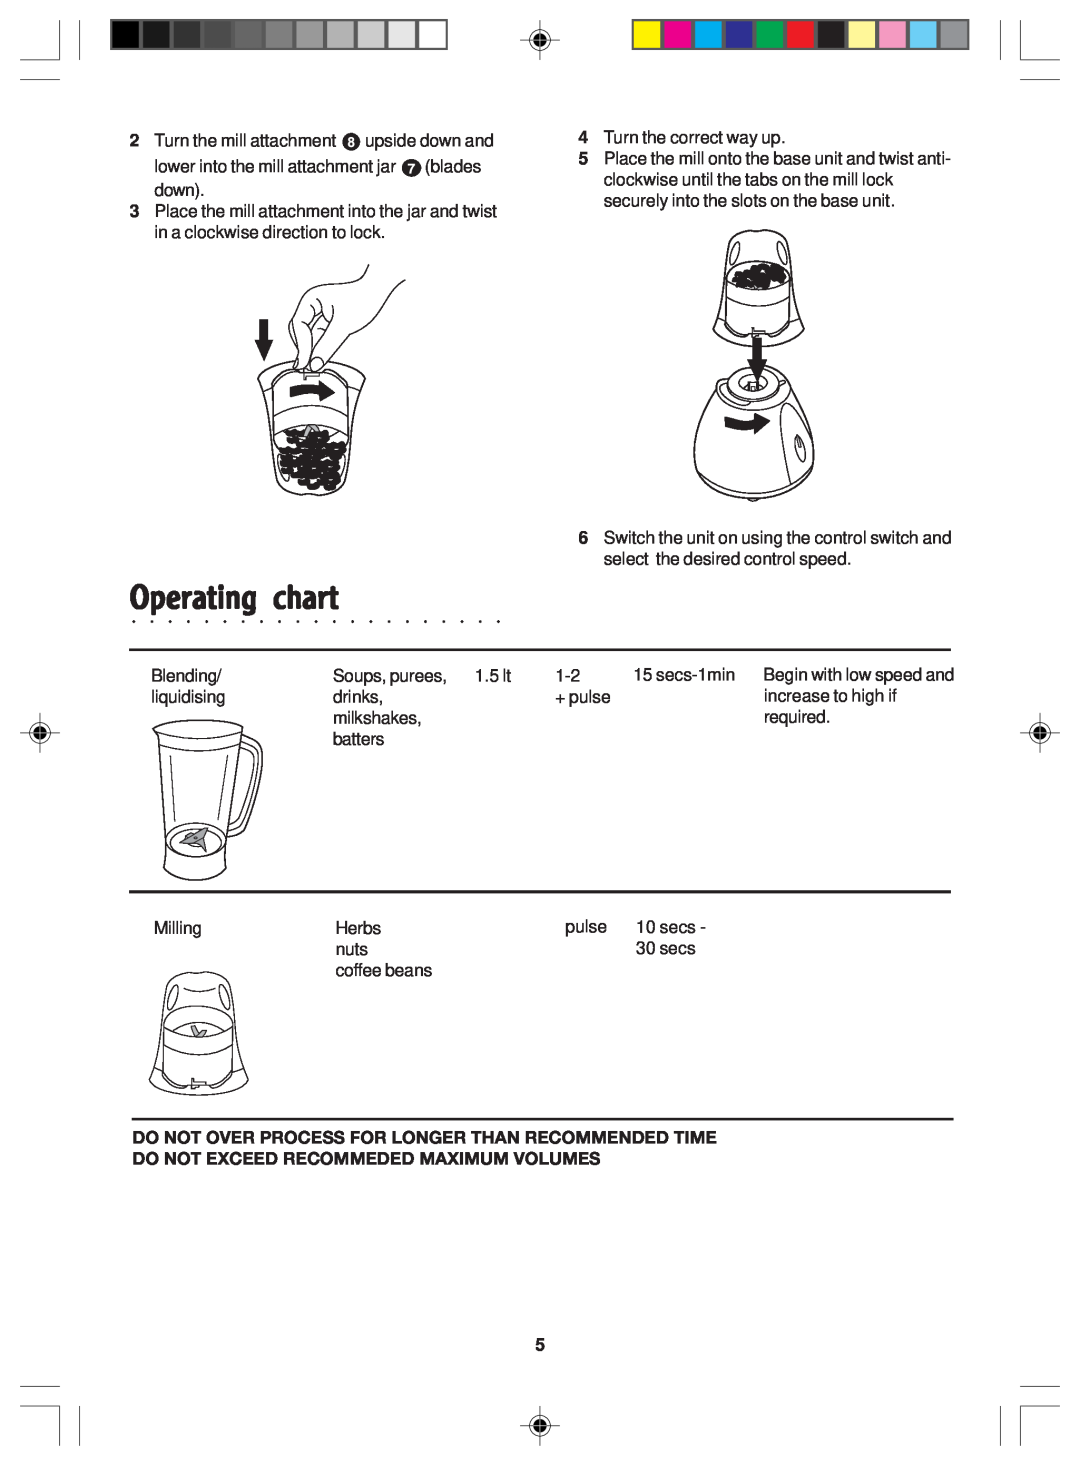 Morphy Richards Blender & mill manual chart, Operating, Do Not Exceed Recommeded Maximum Volumes 